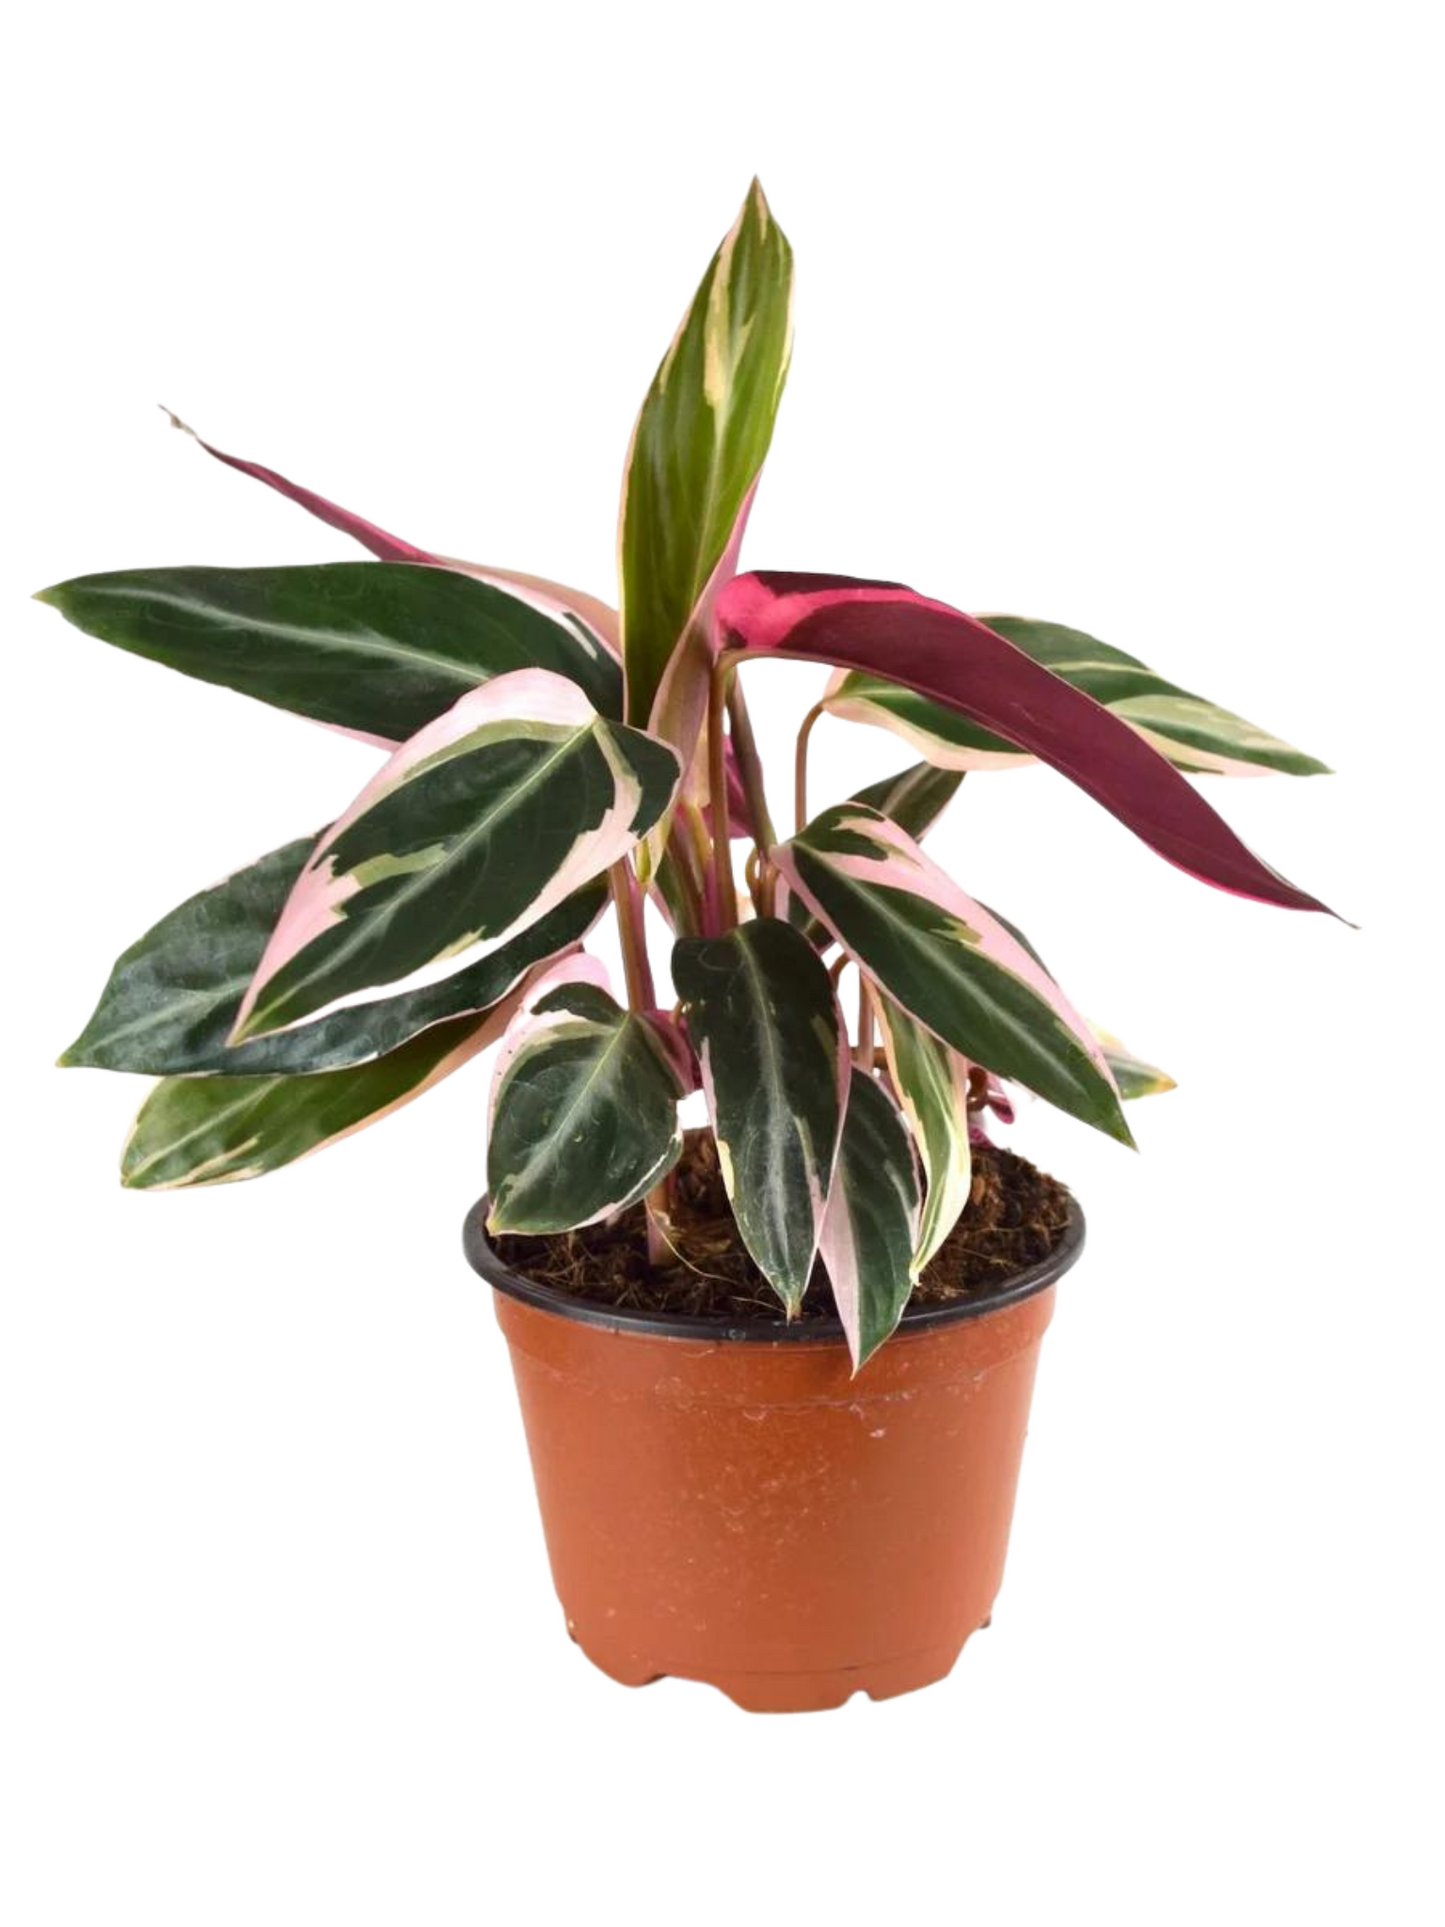 Stromanthe Triostar (pot not included)